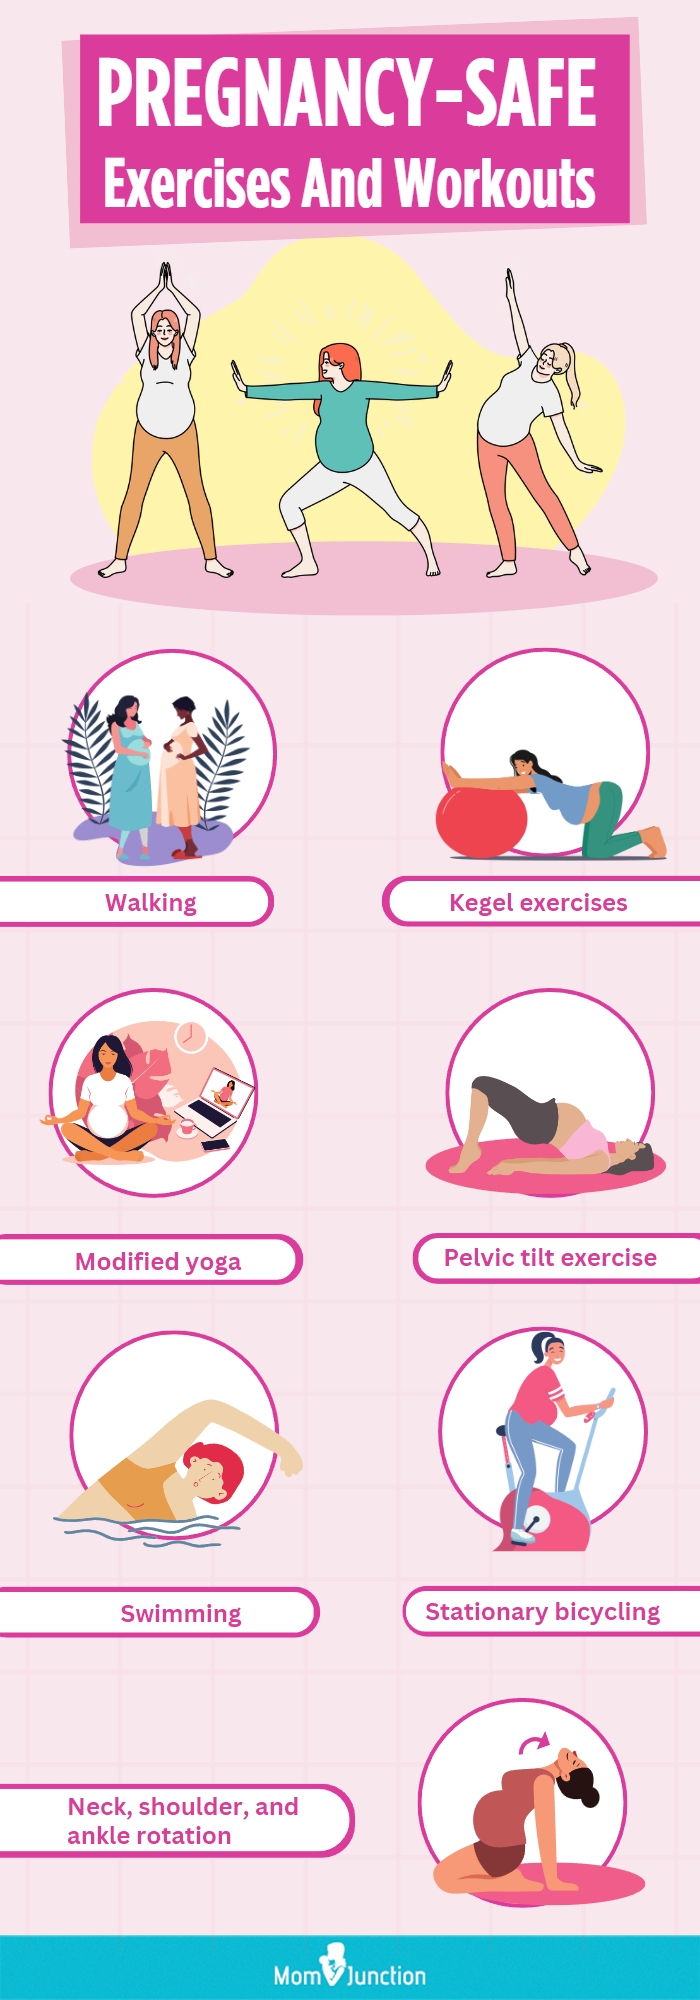 https://www.momjunction.com/wp-content/uploads/2022/05/Pregnancy-Safe-Exercises-And-Workouts-Row-511-All-URLs-3-0.jpg